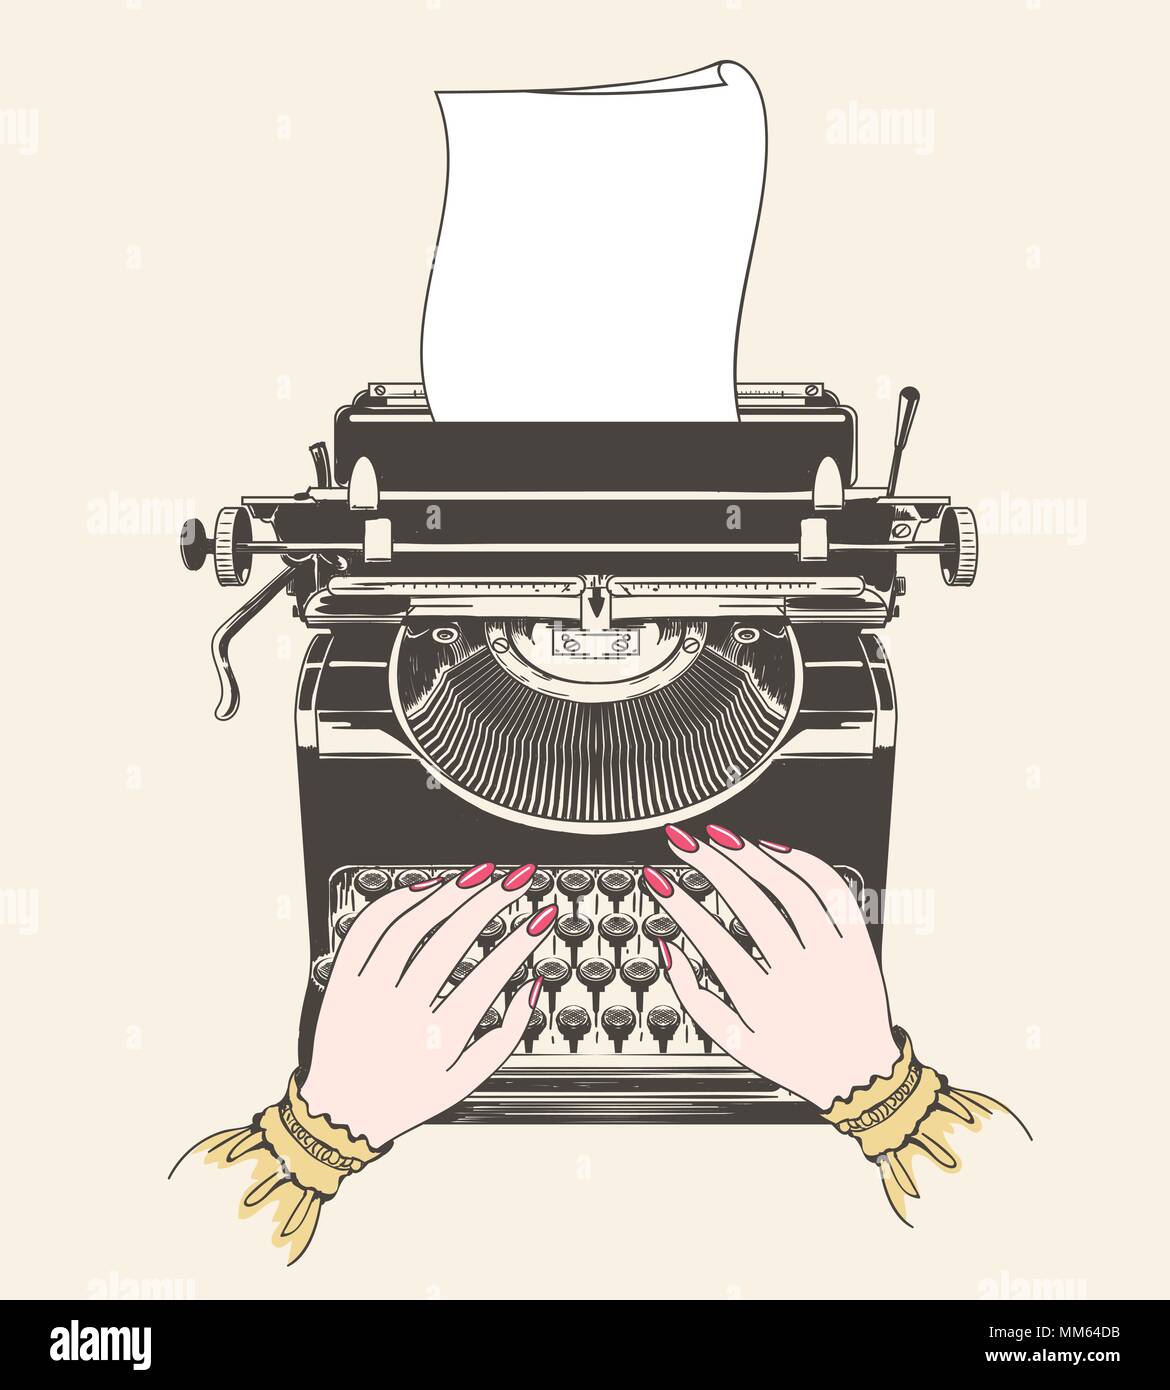 Copywriter concept. Copywriting or blogging vector illustration with vintage typewriter and author hands Stock Vector